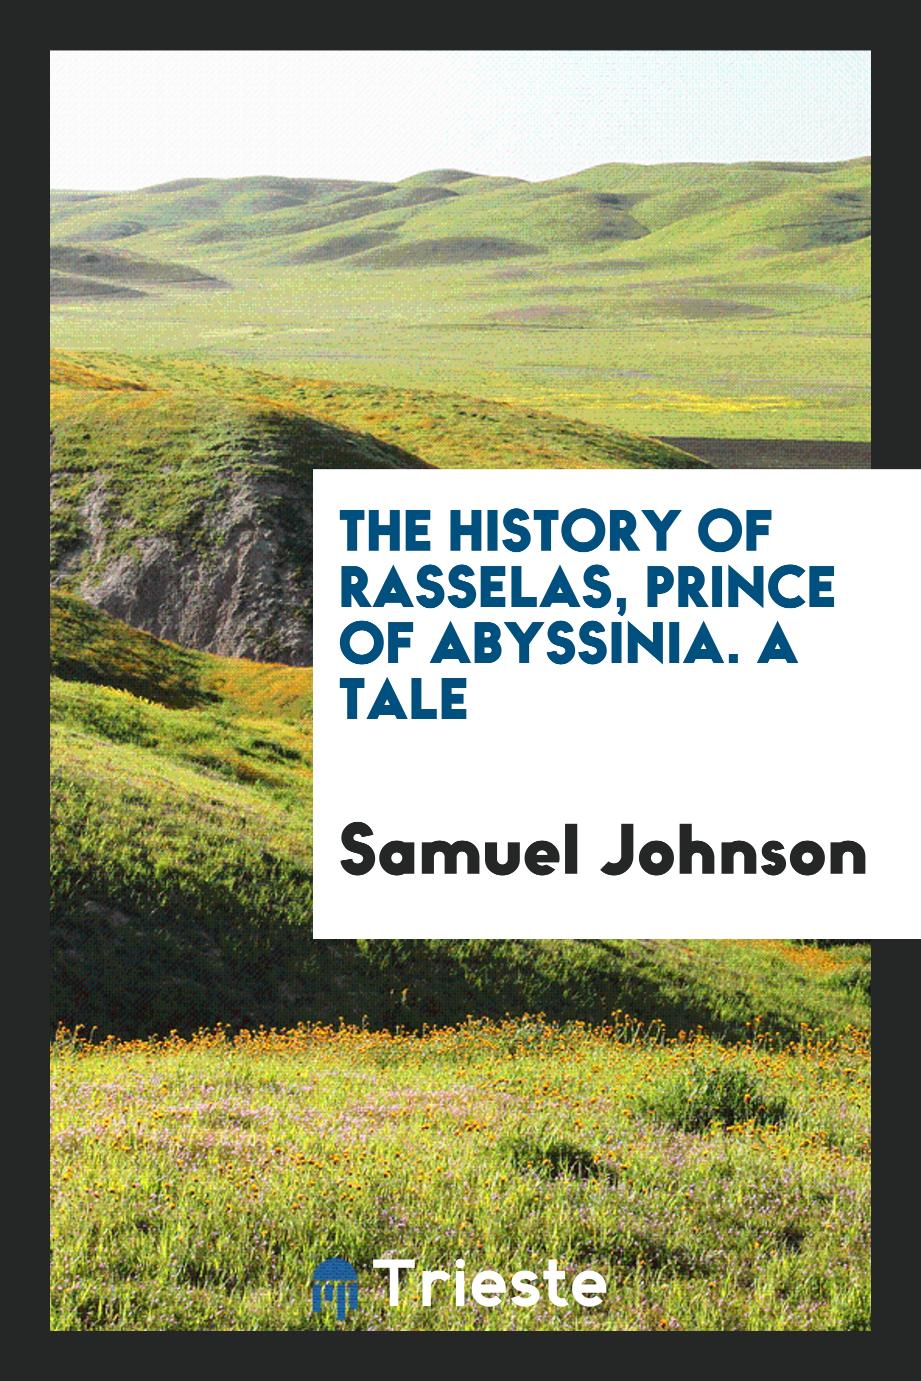 The History of Rasselas, Prince of Abyssinia. A Tale